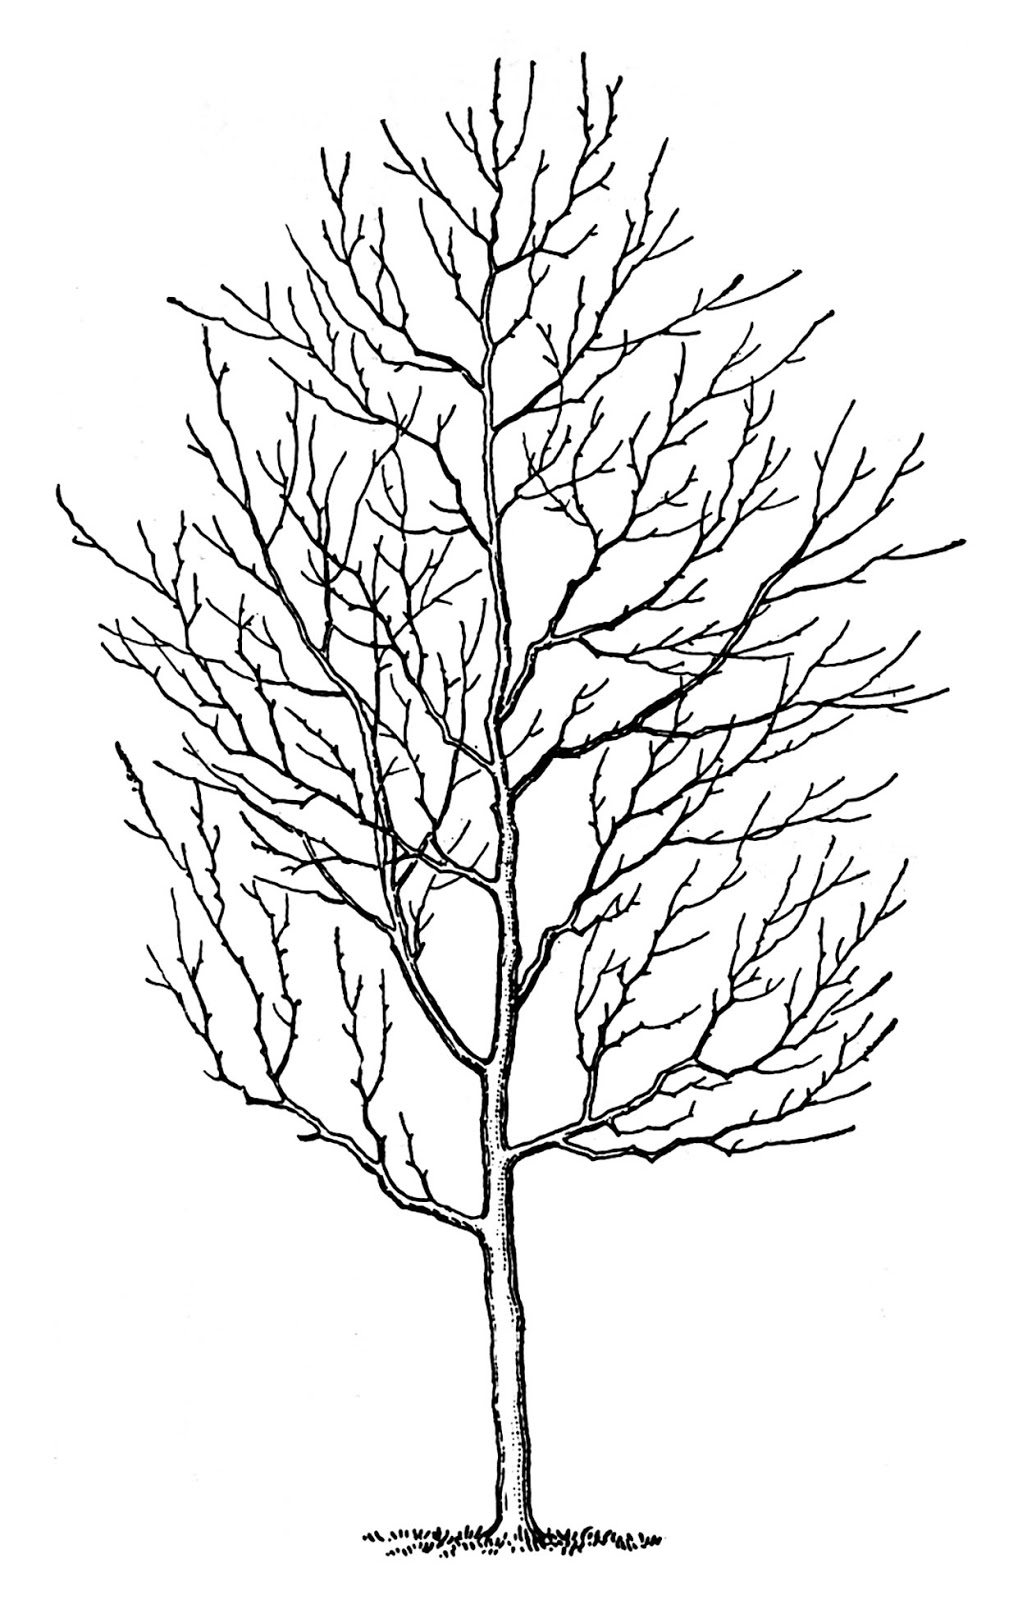 tree sketch clipart - photo #18